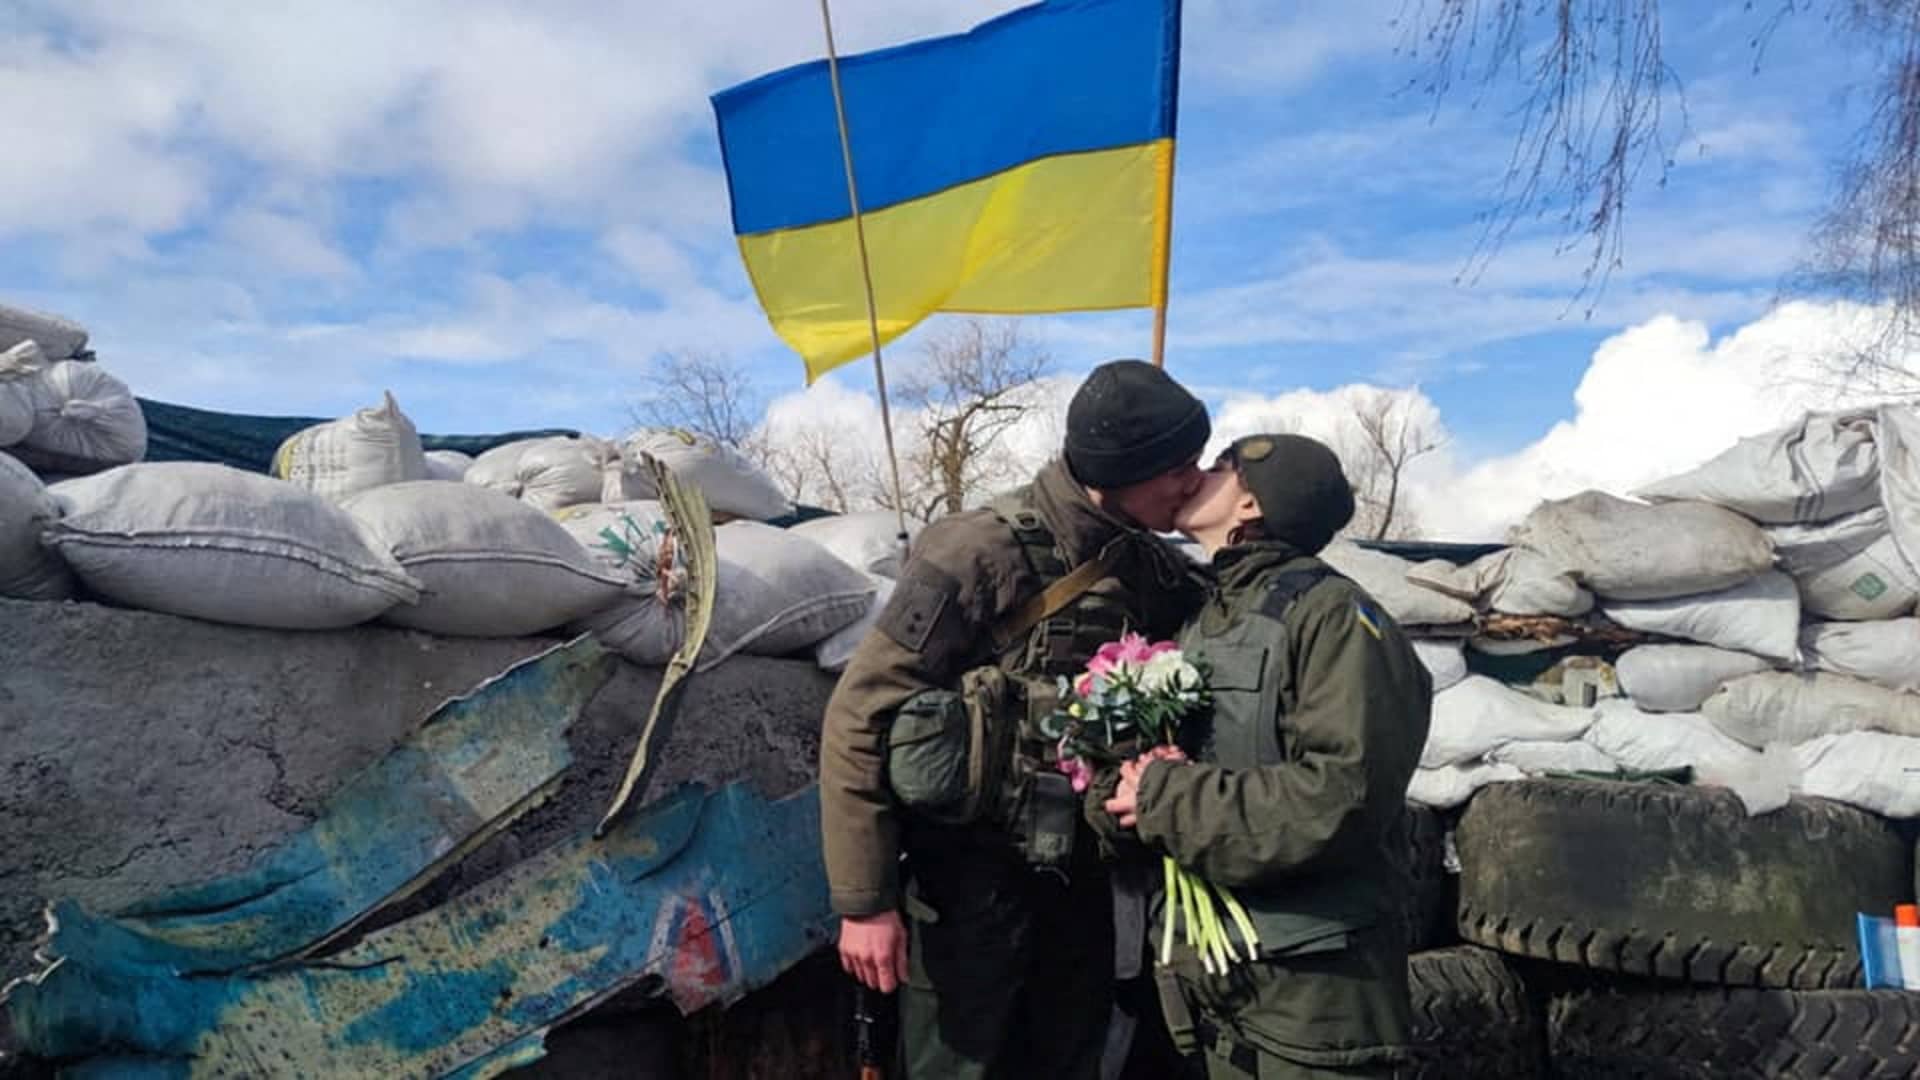 Members of the National Guard of Ukraine Oleksandr and Olena kiss at their wedding during Ukraine-Russia conflict, at a checkpoint in unknown location, in Ukraine, in this handout picture released March 8, 2022.